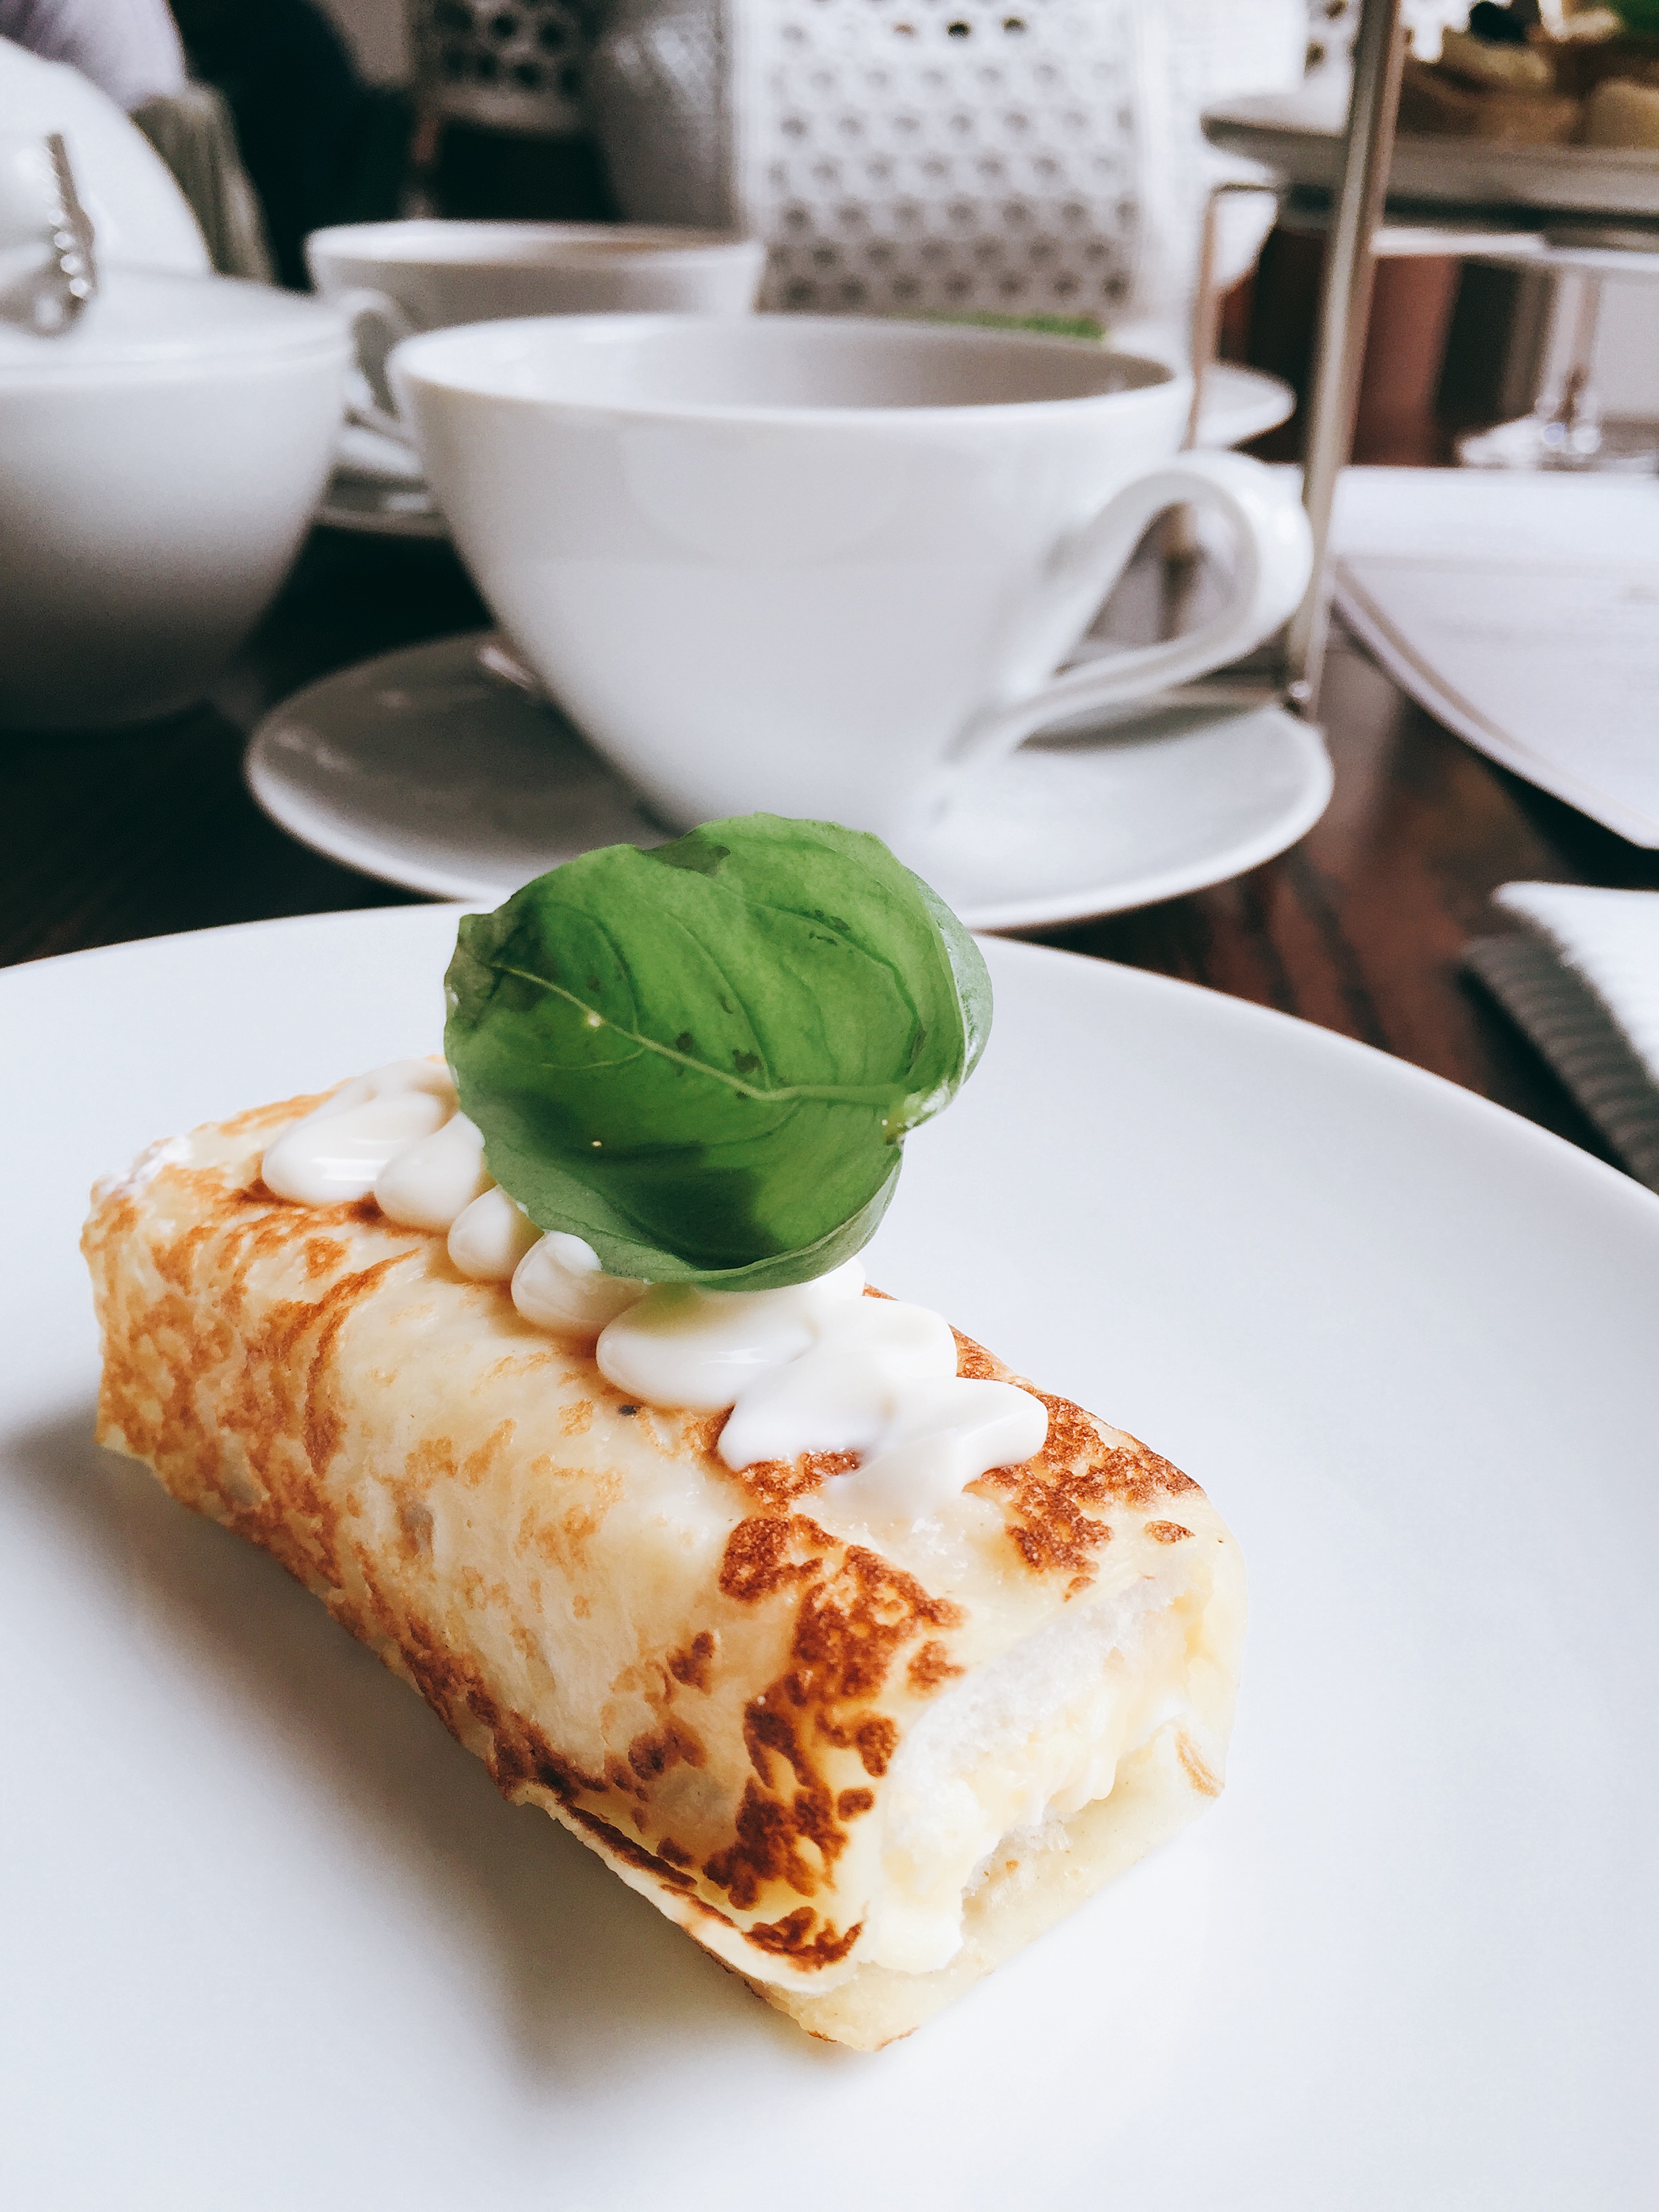 Crepe sandwiches - Afternoon Tea at the Royal Albert Hall